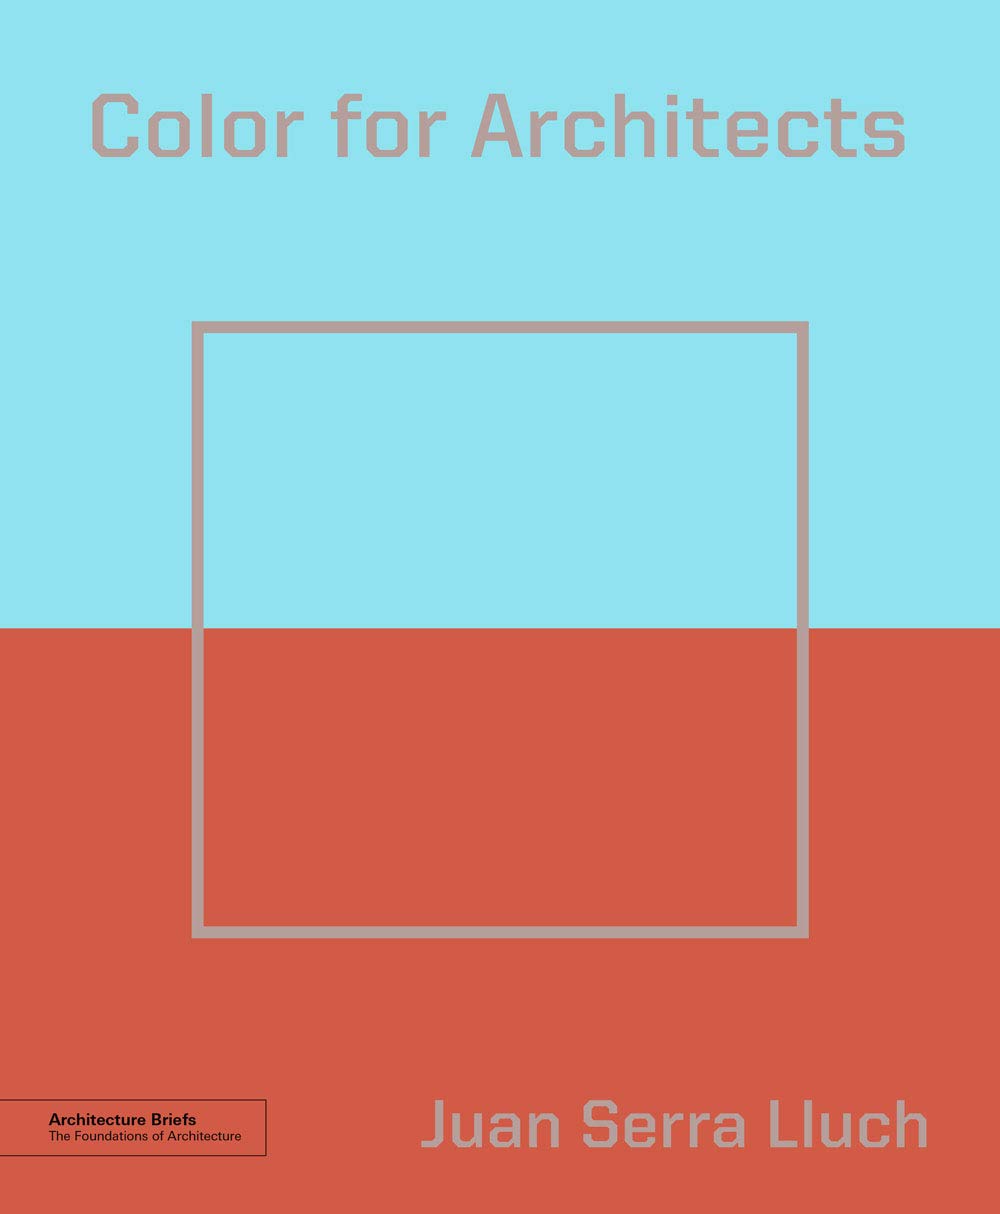 Juan Serra Lluch - Color for Architects